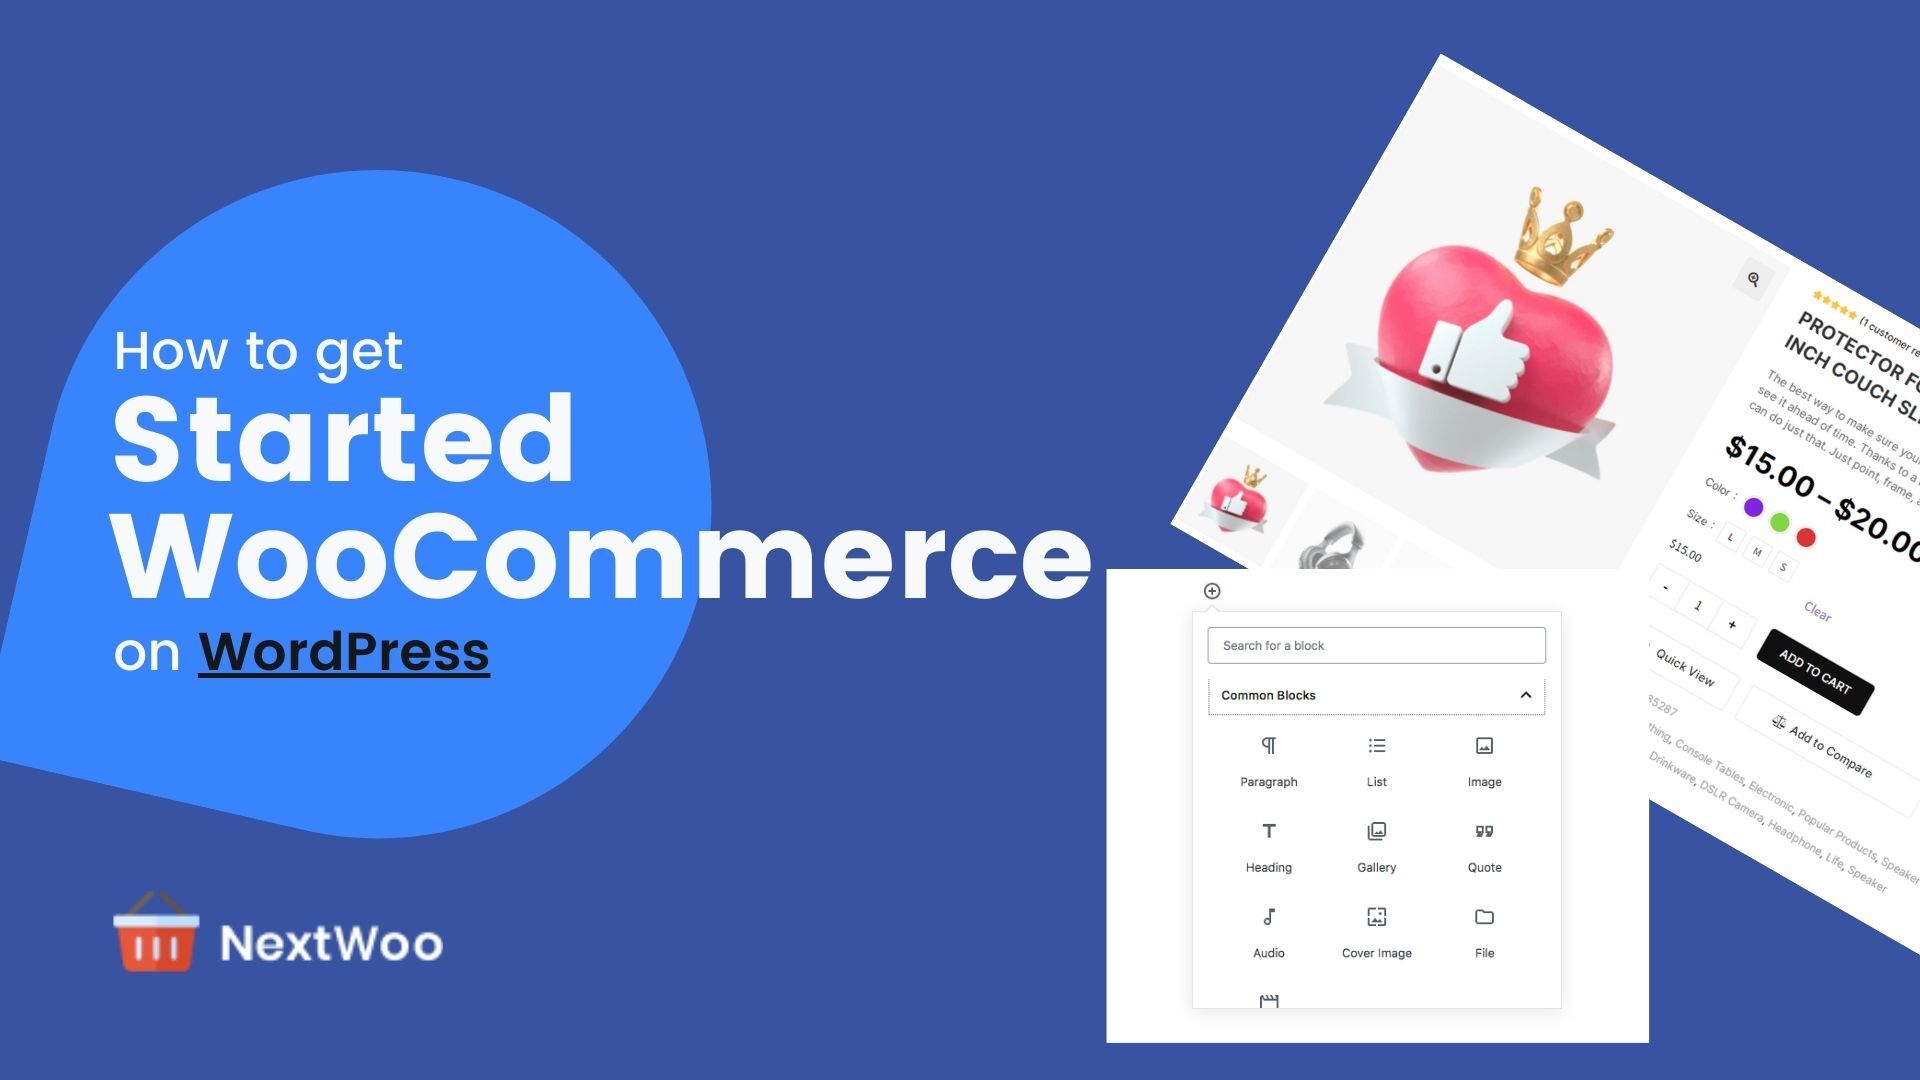 How to get started with WooCommerce on WordPress?